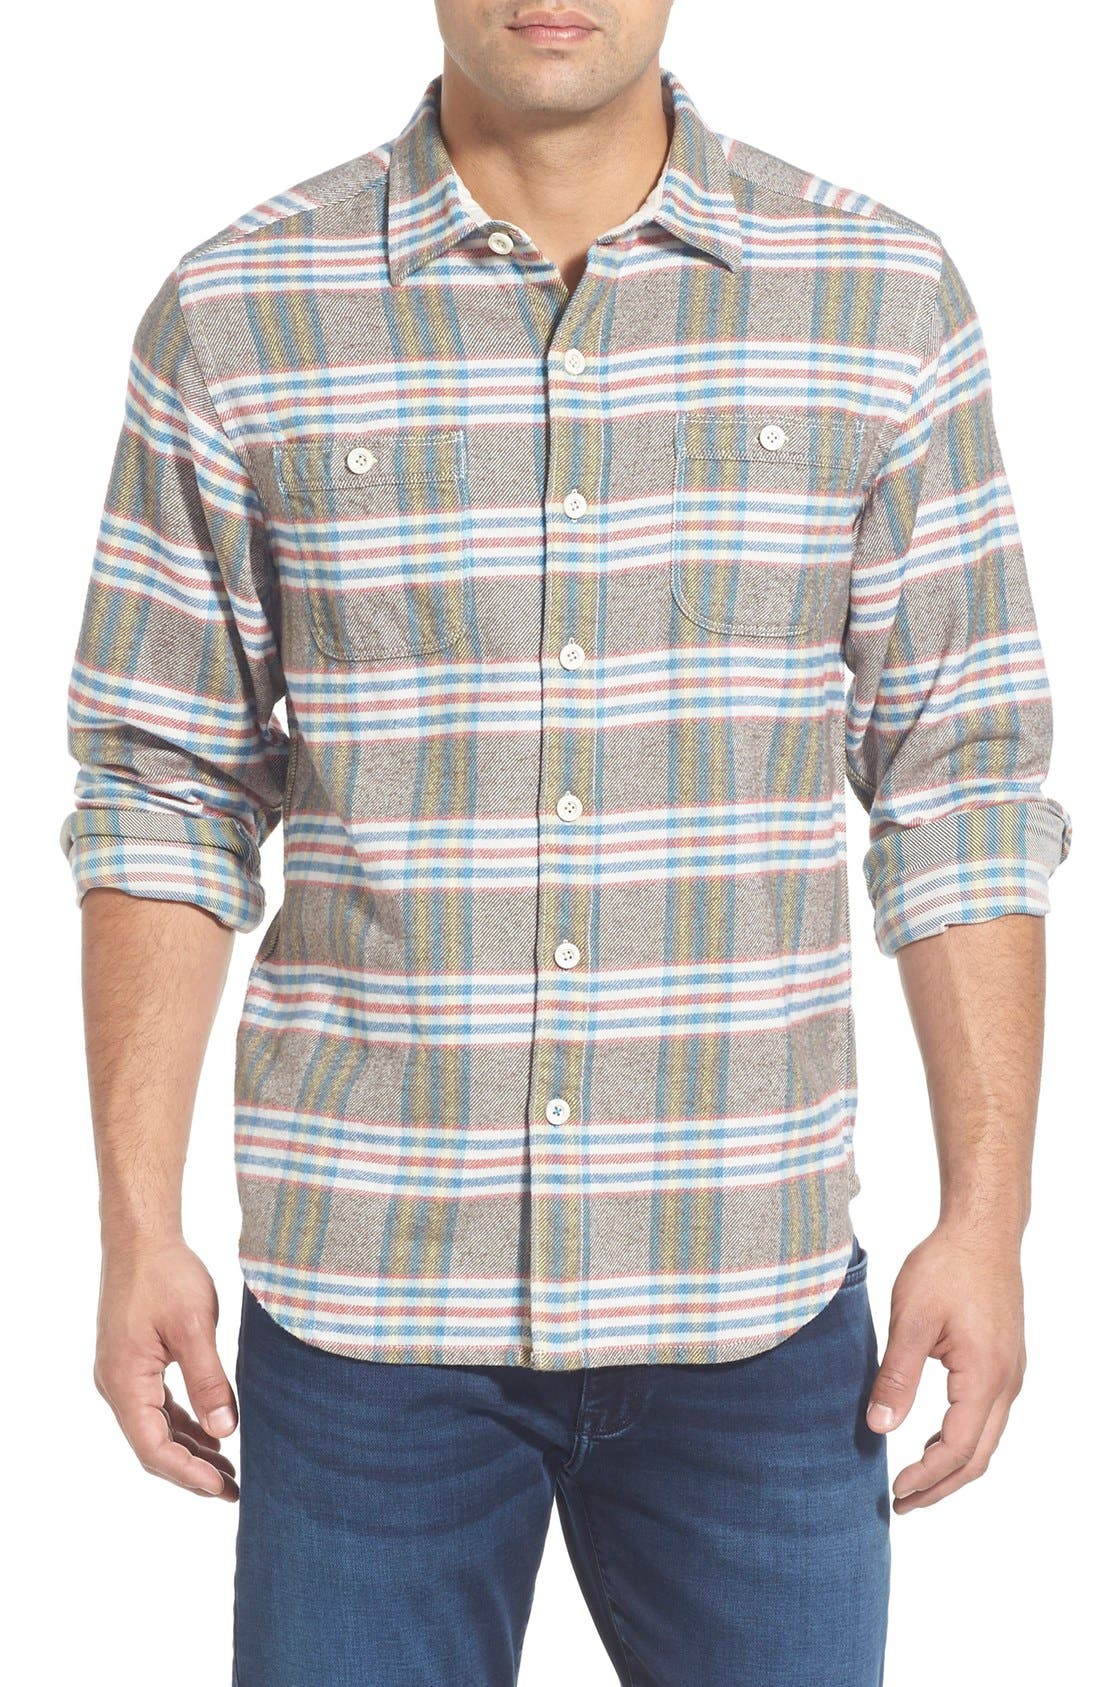 Tommy Bahama 'Flannel Time' Original 